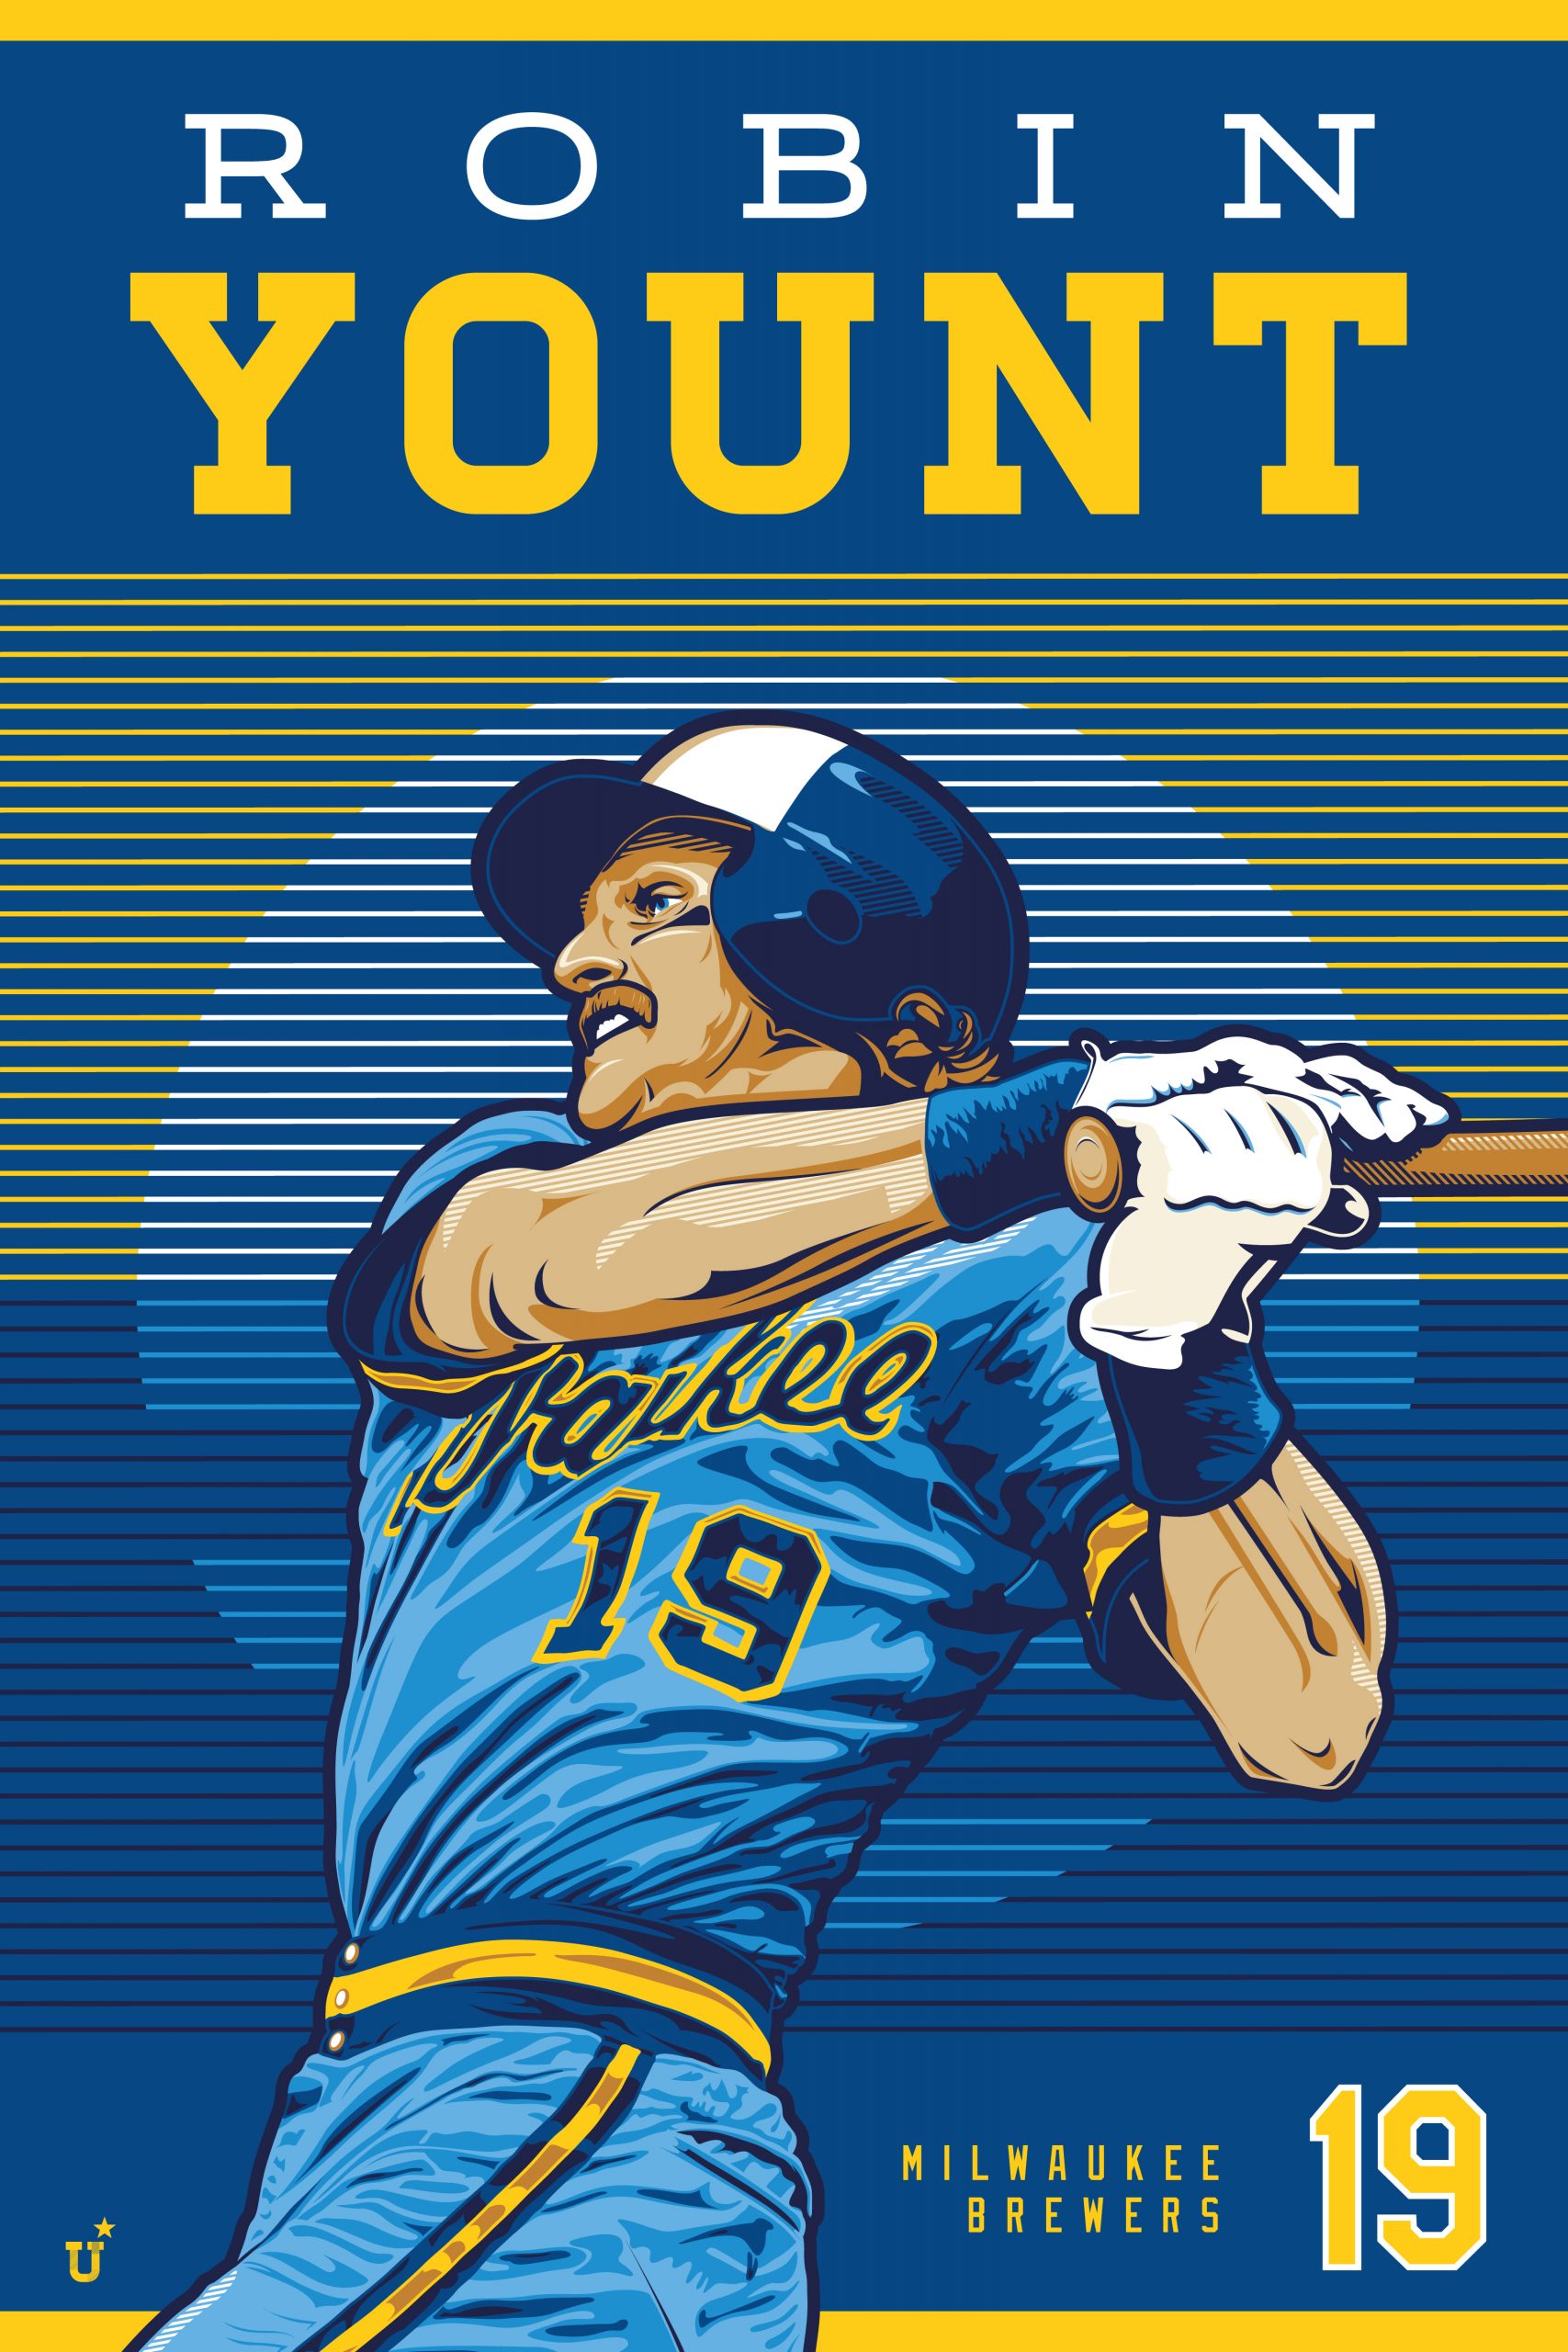 UNOFFICiAL ATHLETIC  Robin Yount Poster Design